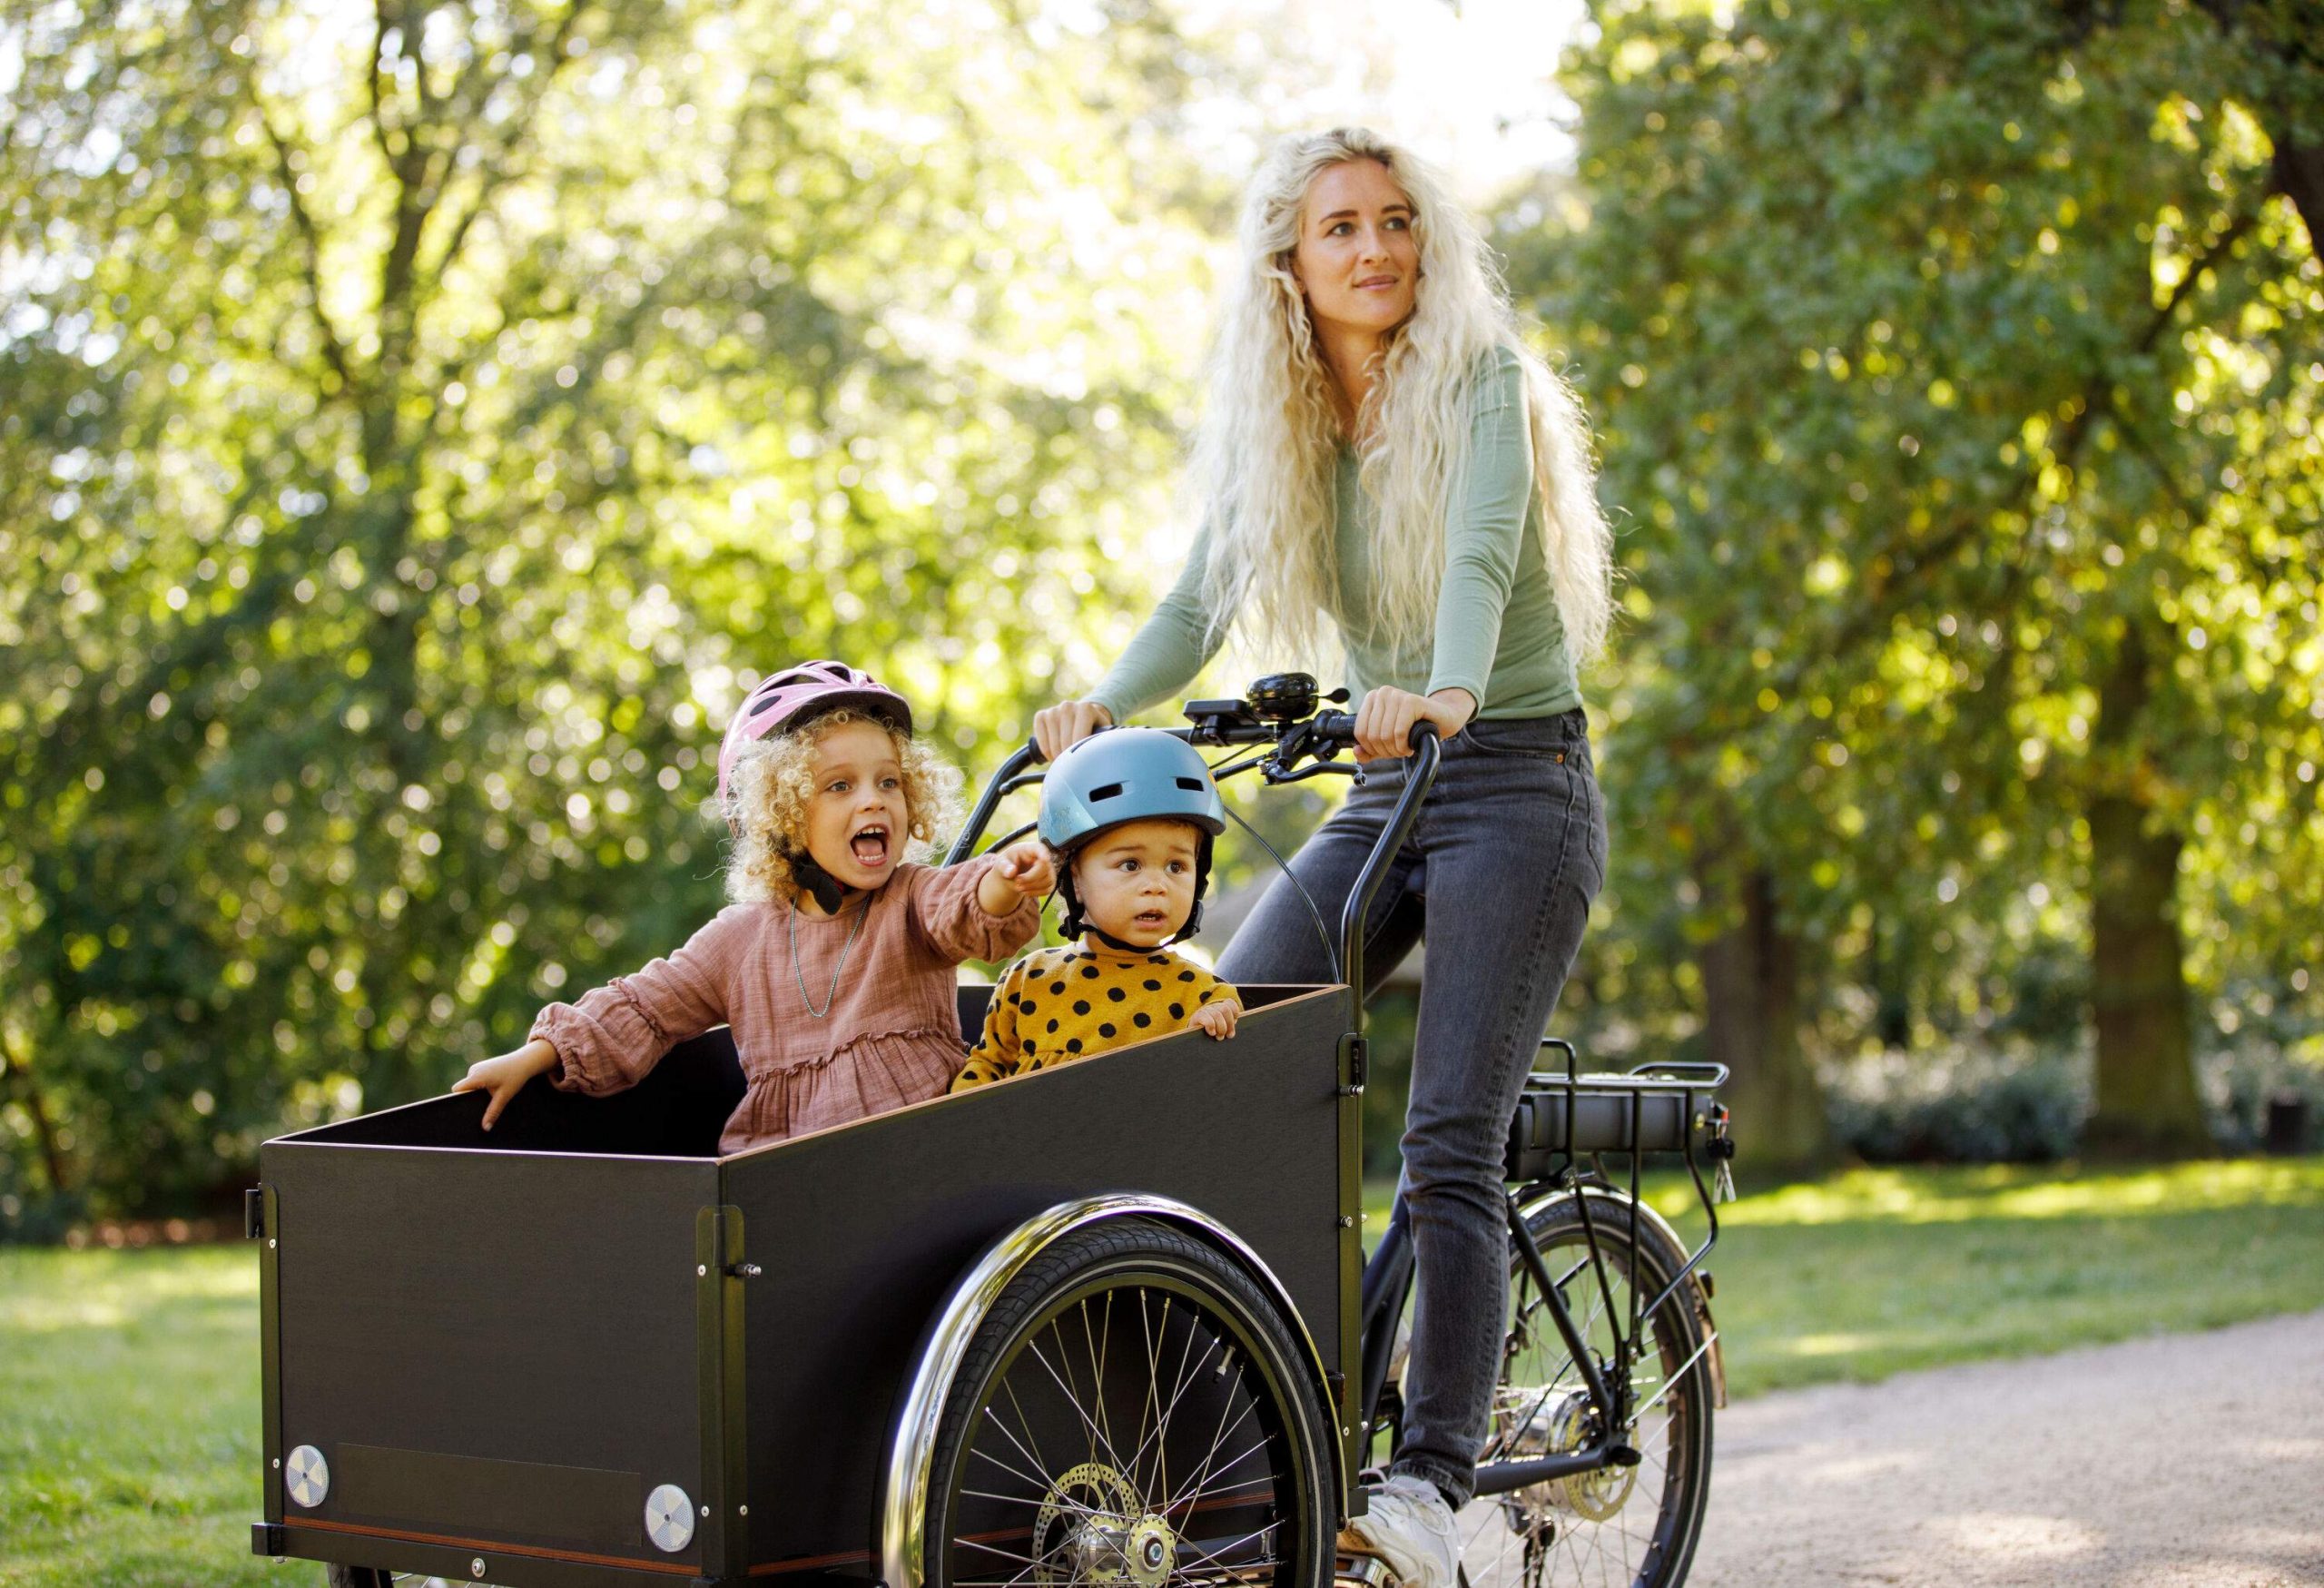 A mother and her two children riding on a modern cargo bike.